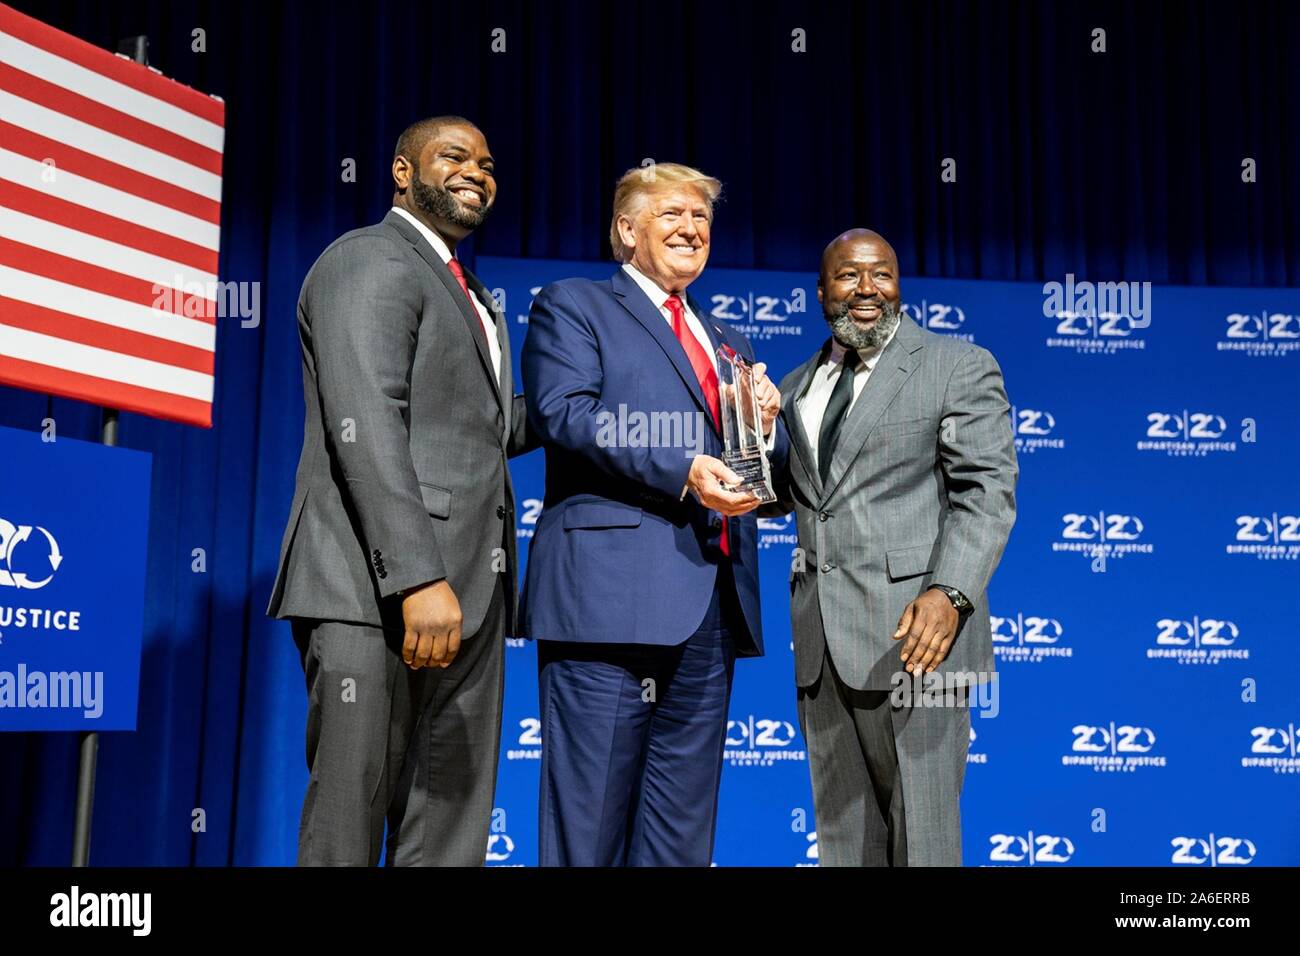 Colombia, United States of America. 25 October, 2019. U.S President Donald Trump is presented with an award by Florida State Rep. Byron Donalds, left, and Matthew Charles, during the 2019 Second Step Criminal Justice Forum at Benedict College October 25, 2019 in Columbia, South Carolina.  Credit: Shealah Craighead/White House Photo/Alamy Live News Stock Photo